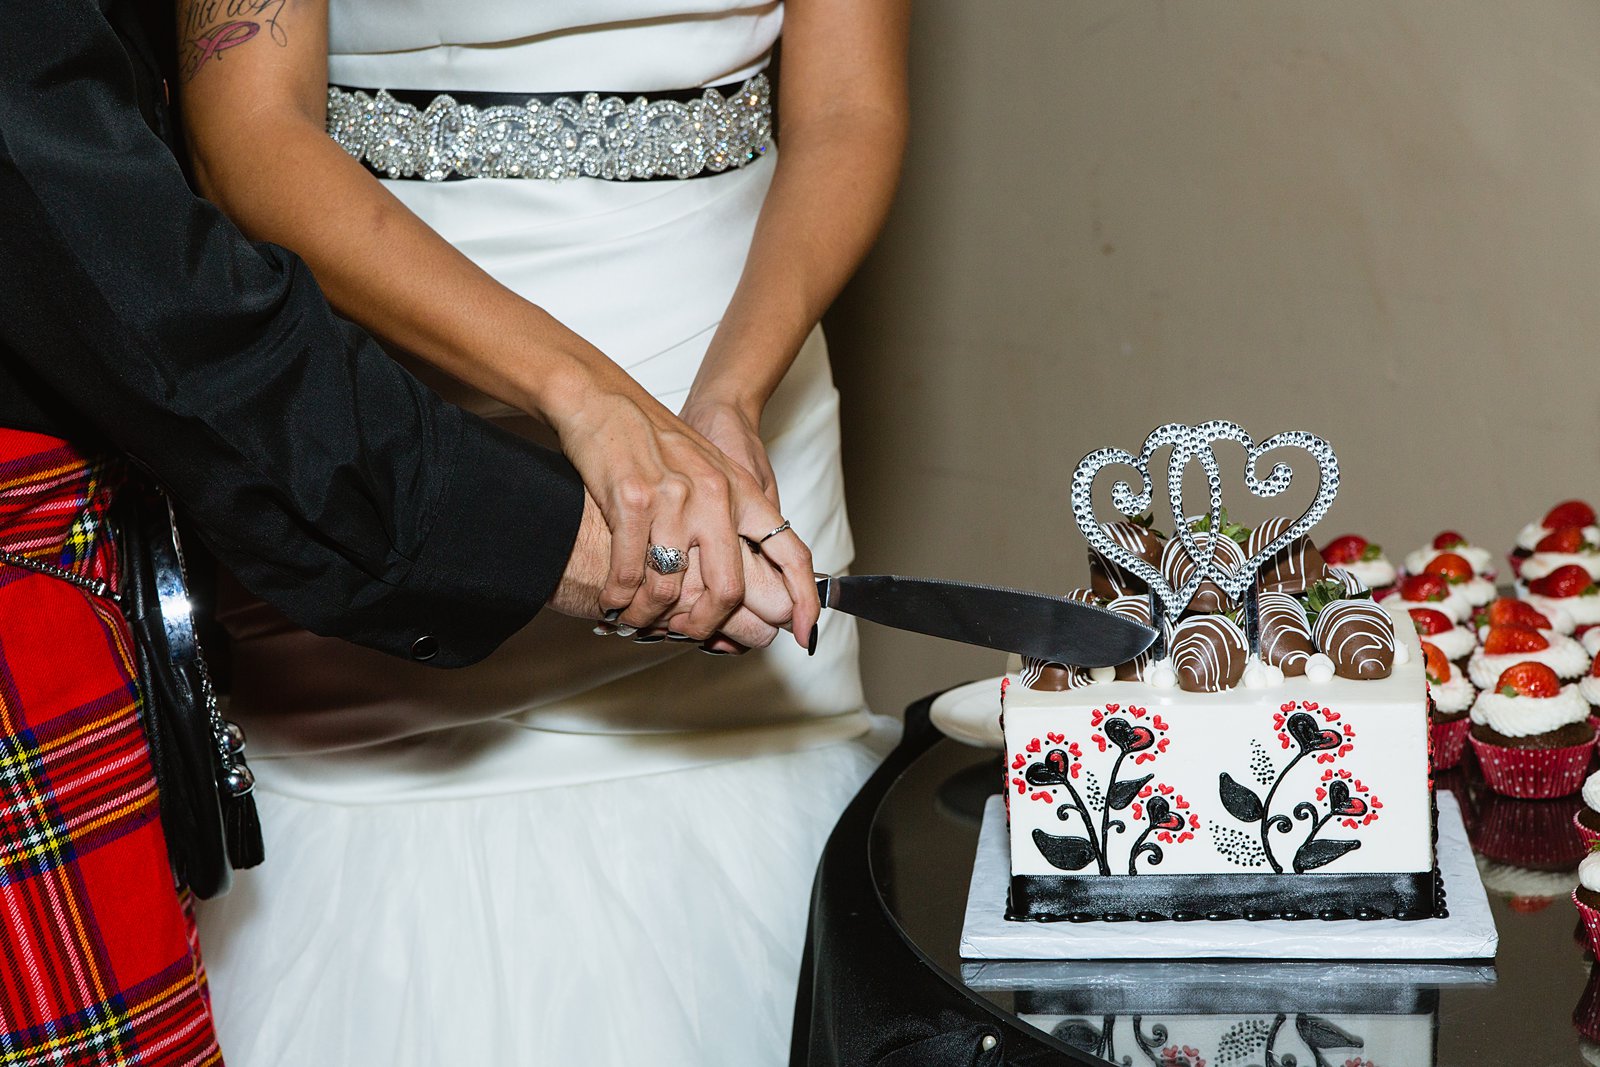 Bride and groom cutting the cake during their wedding reception at the Superstition Manor by PMA Photography.